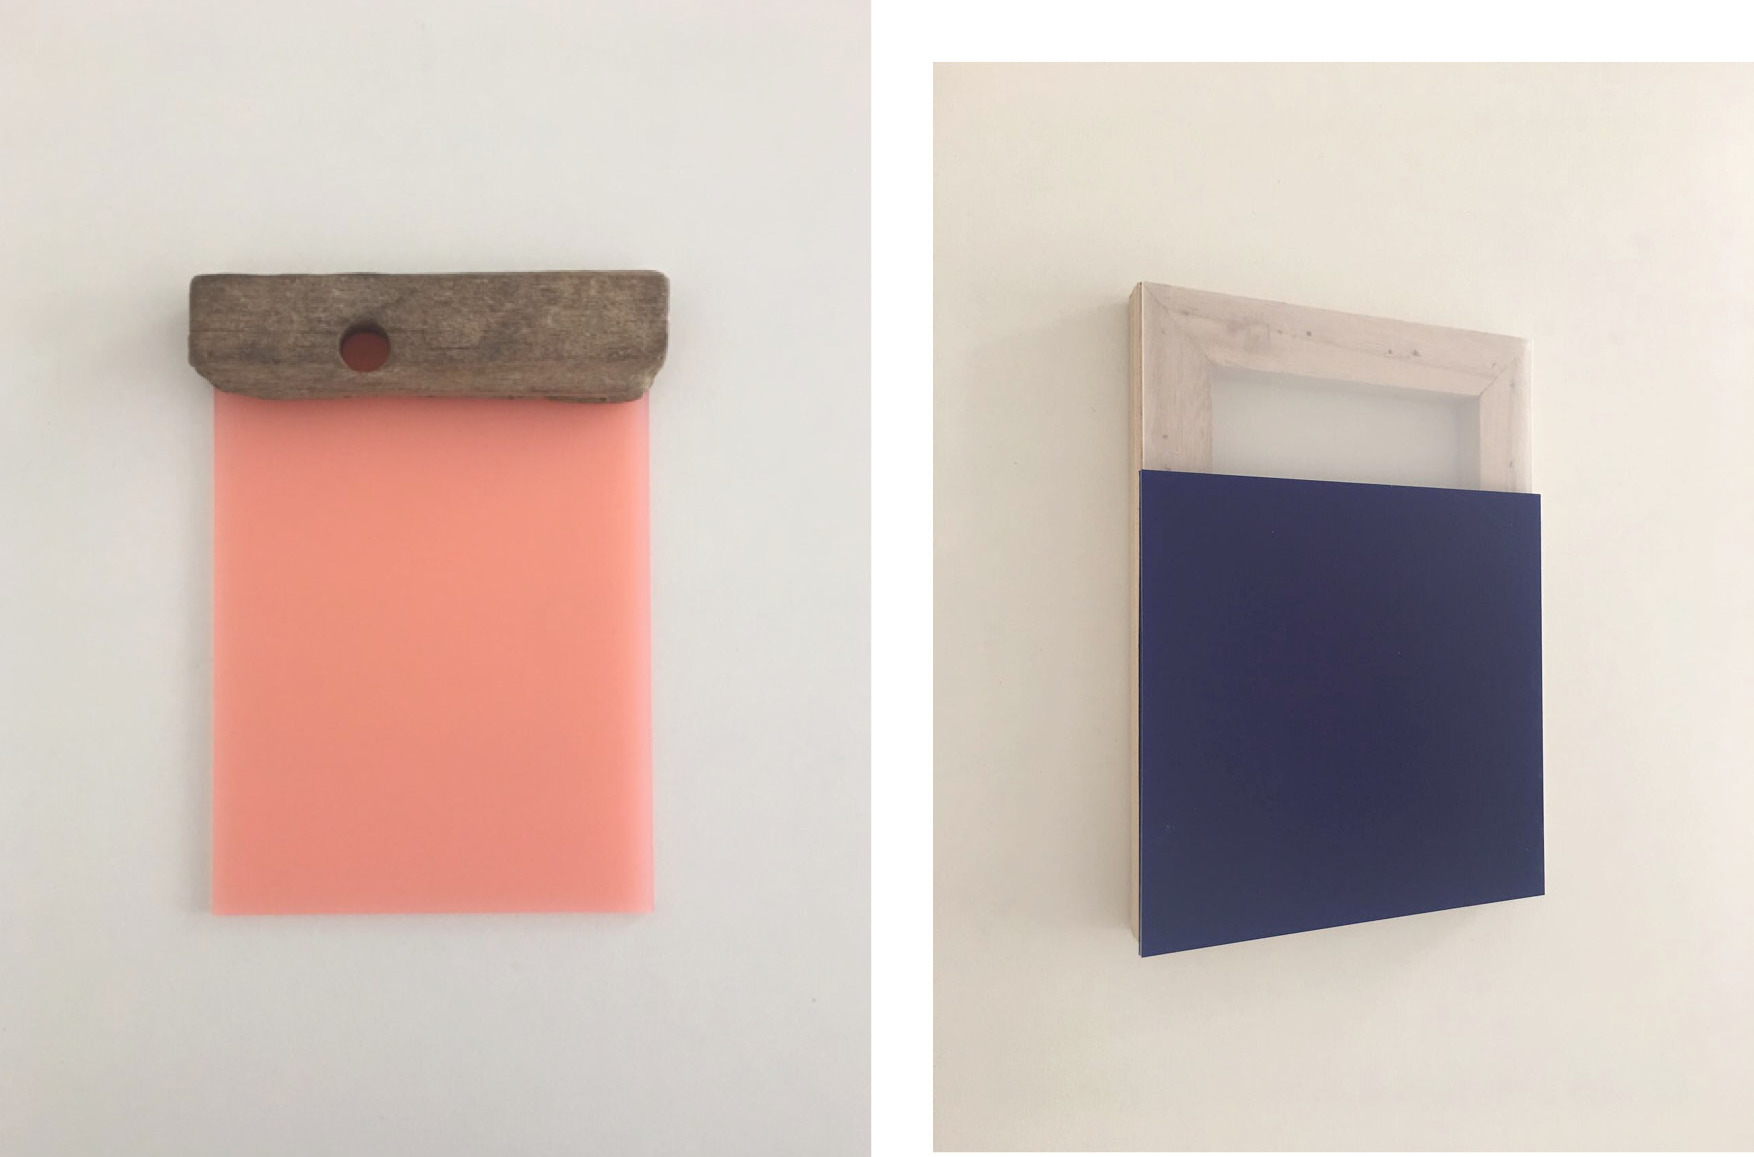 Poseidon‘ son, 21.5 x 15.5 x 2 cm (2017) Handpicked chunk of wood (East Sussex) on pink plexiglass (l) & Ral, 21.2 x 15 x 1.5 cm (2017) Plexiglass sheets (transparent and blue) on wooden frame